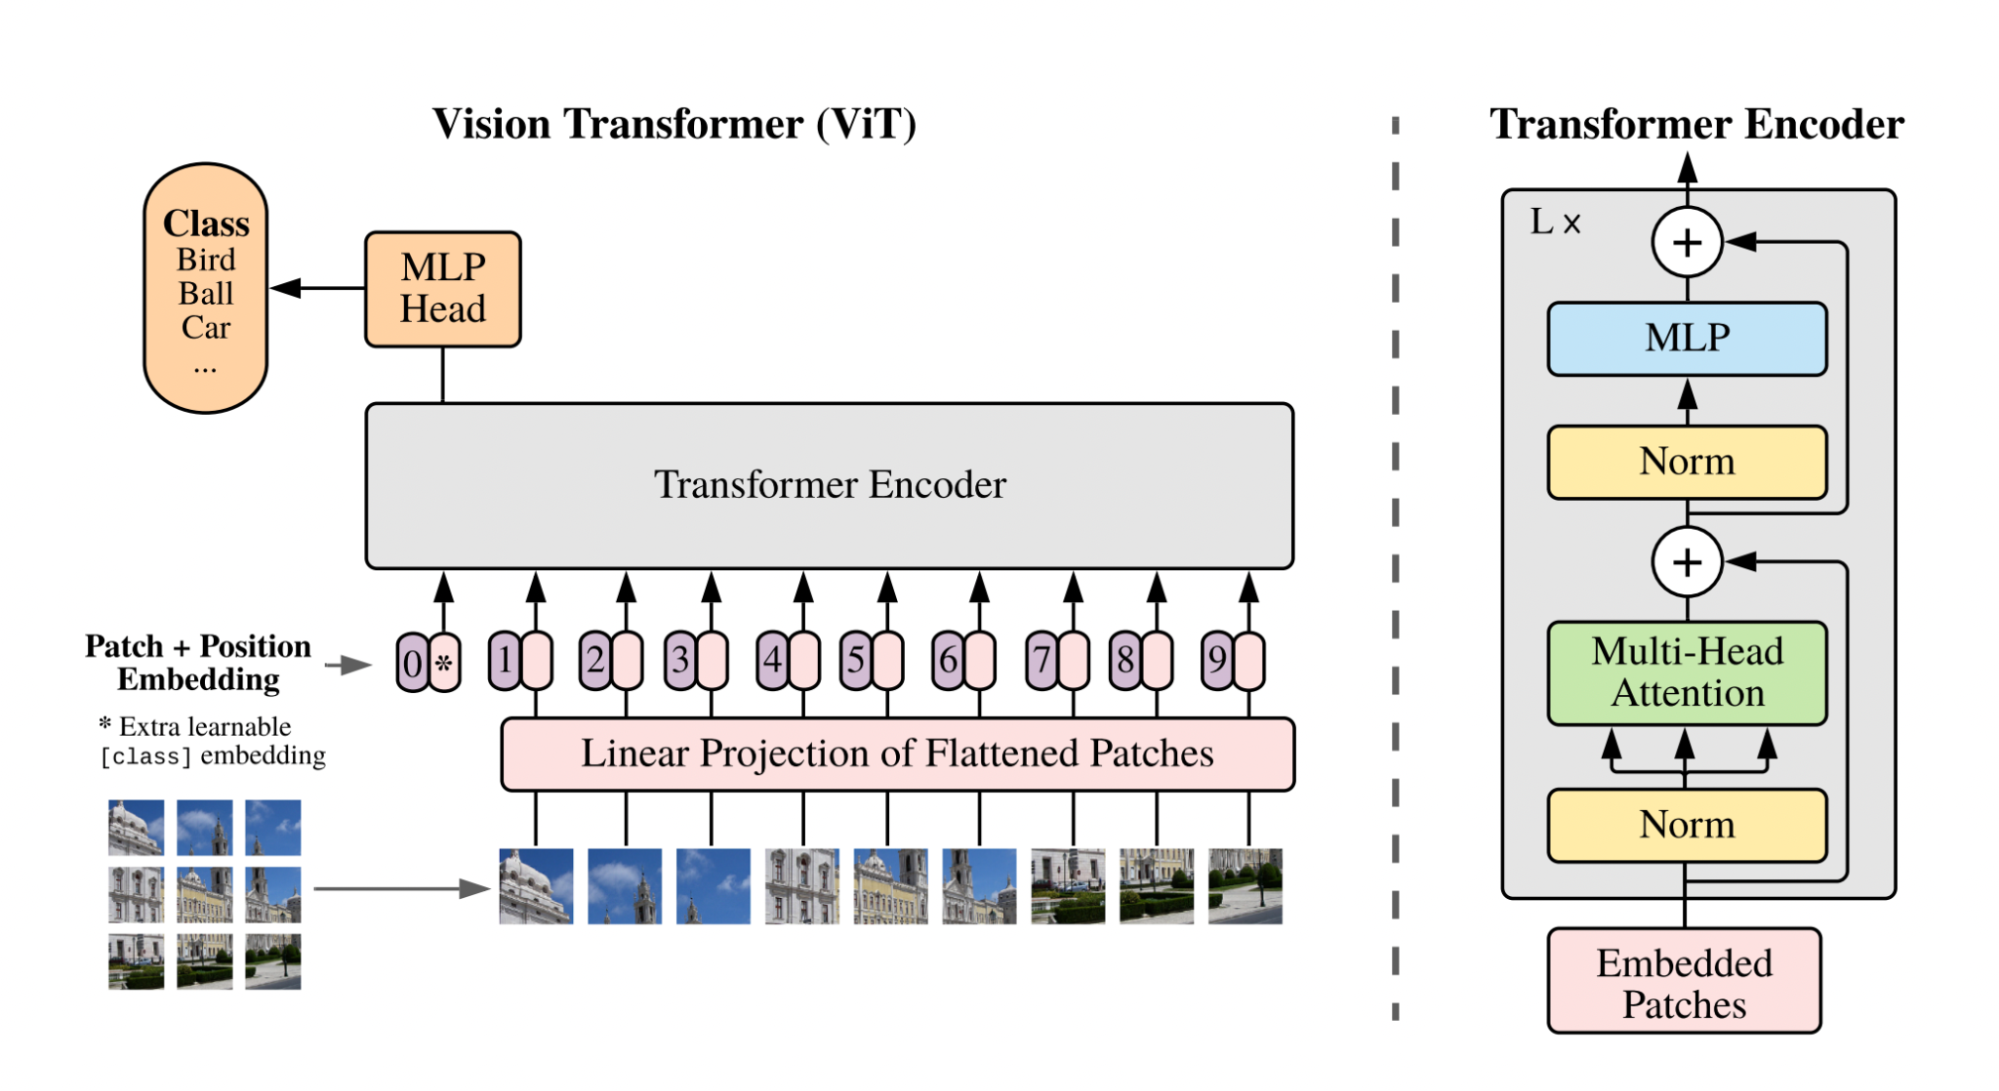 An Image Is Worth 16x16 Words: Transformers For Image Recognition At Scale example